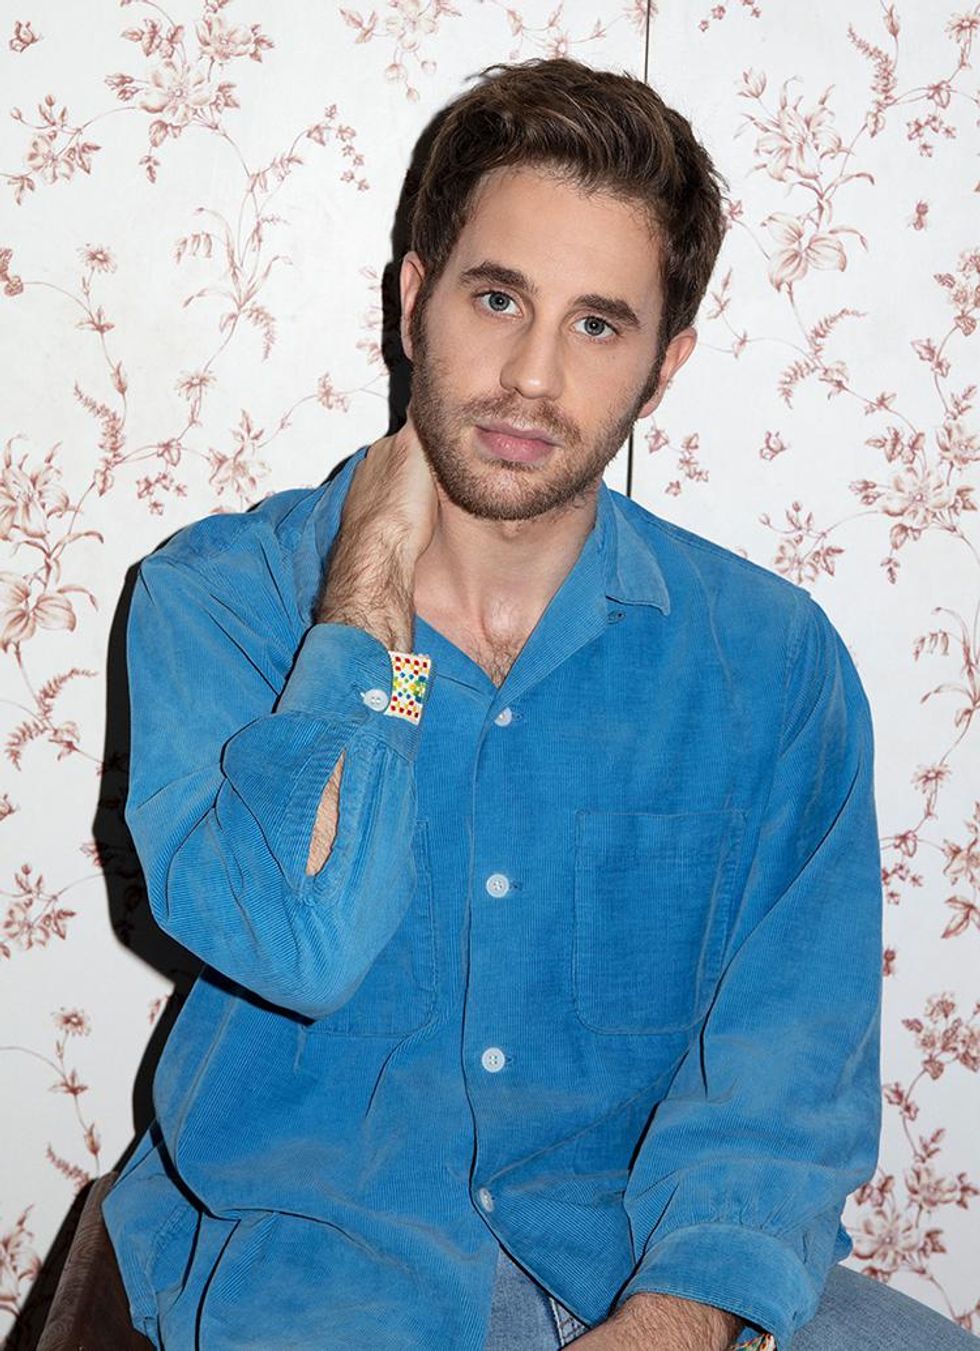 Ben Platt Is Waiting to 'Fall In Love With Another Man'